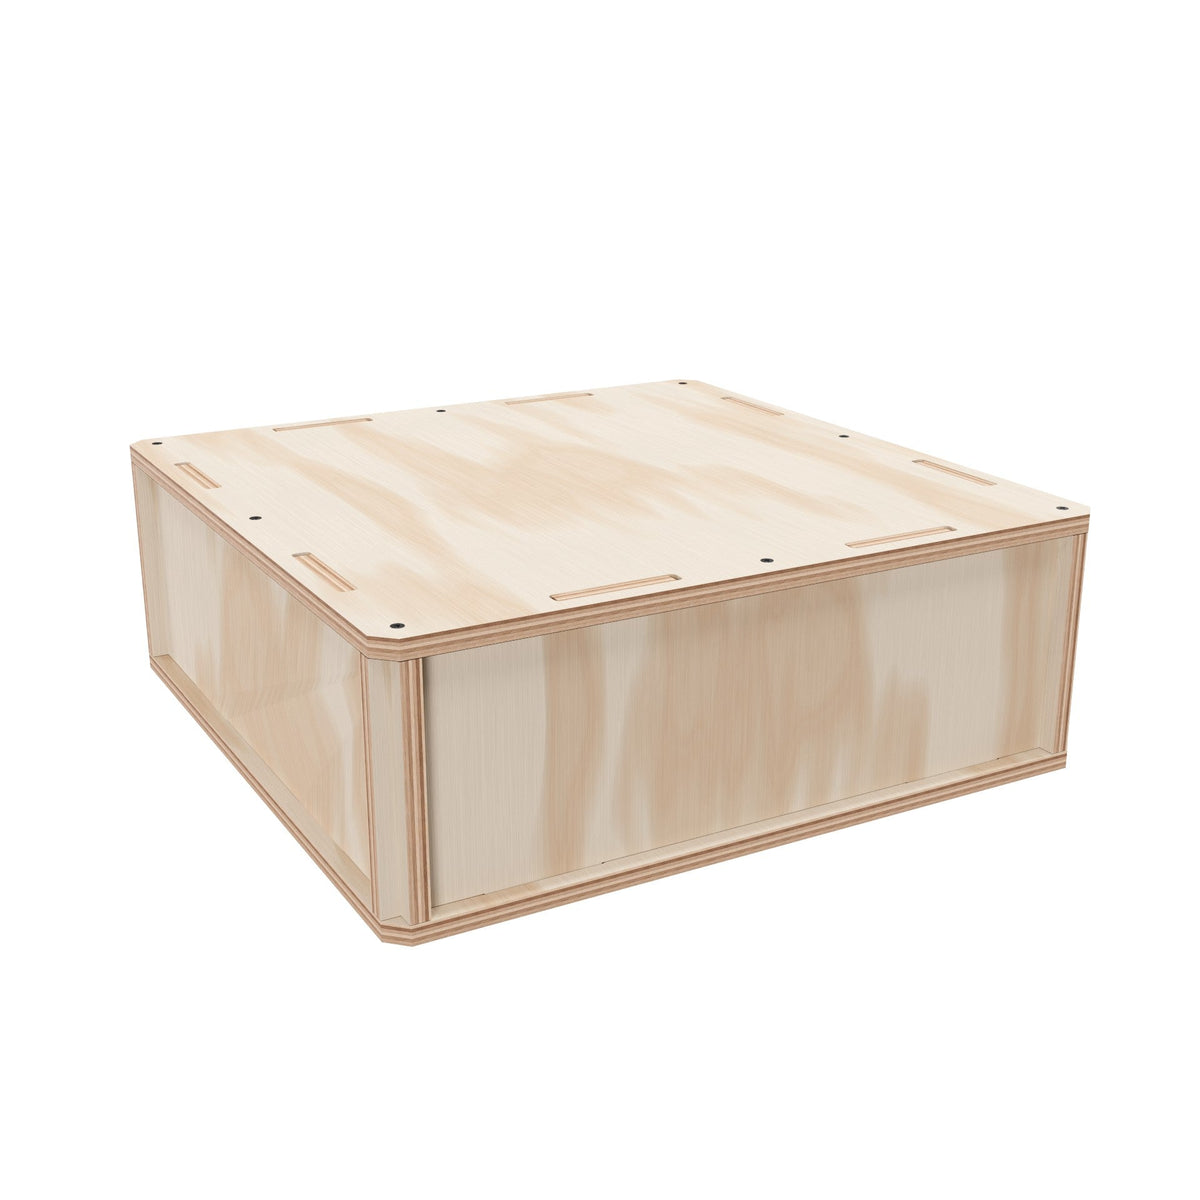 Plywood Shipping Crate 20x10x7